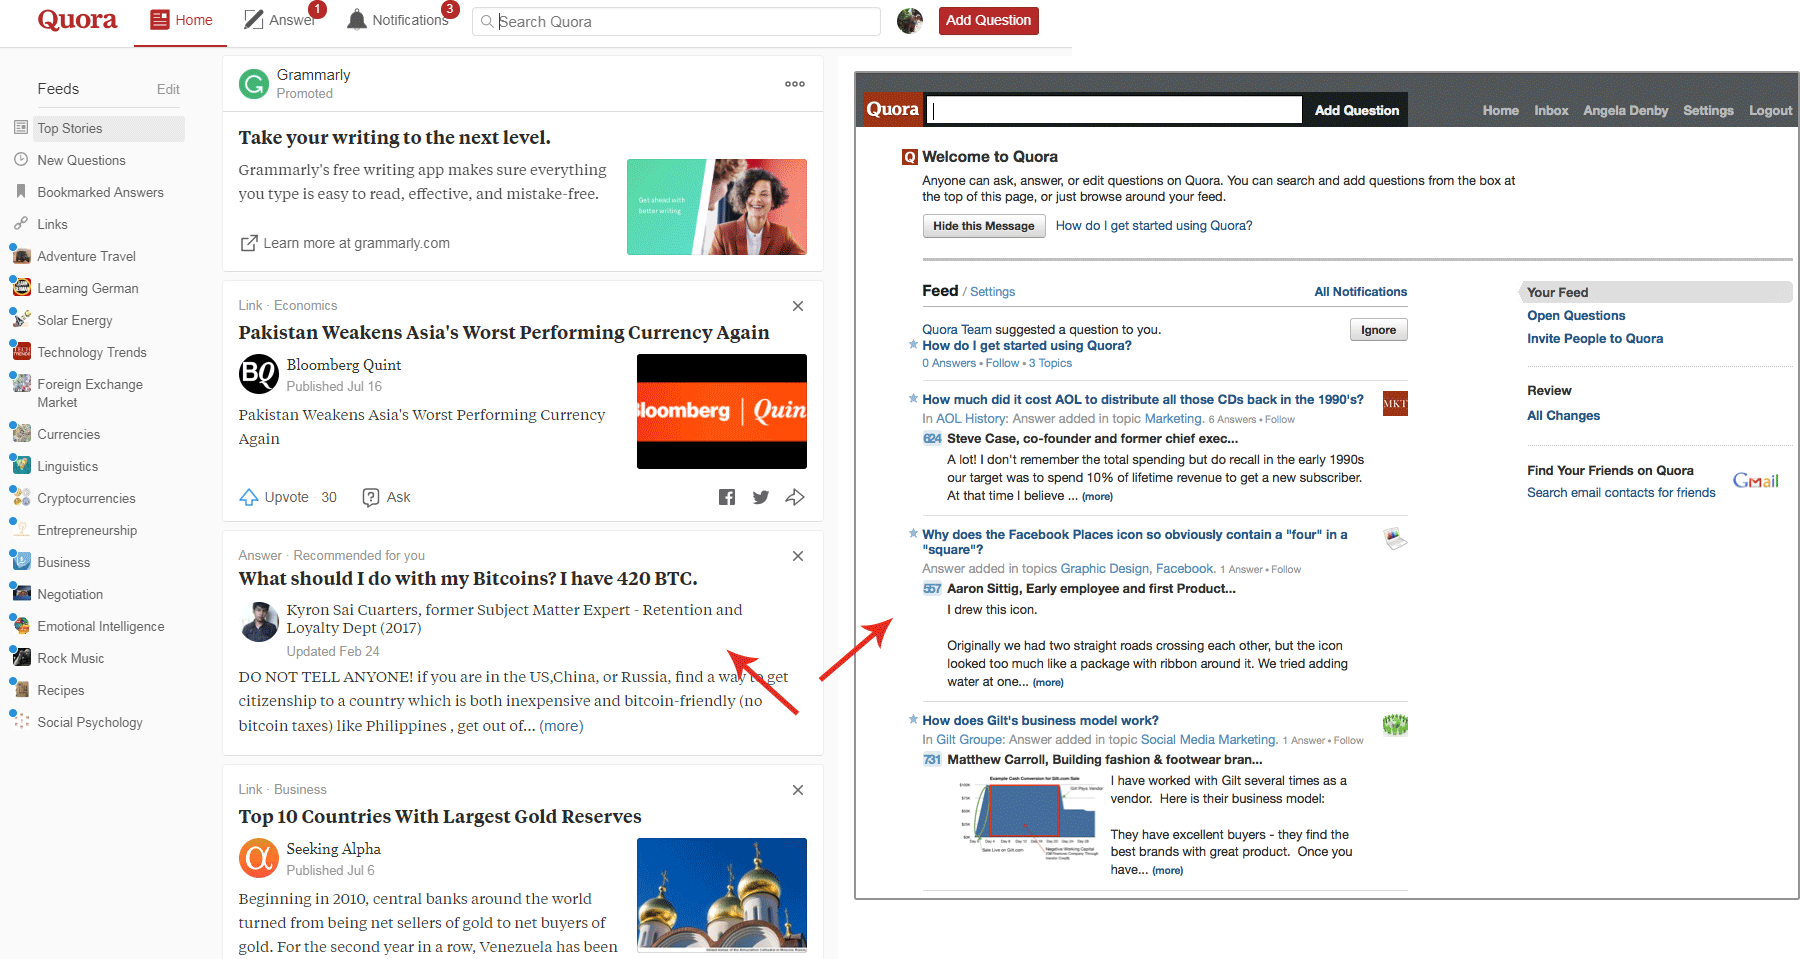 Side by side comparison of old and new Quora